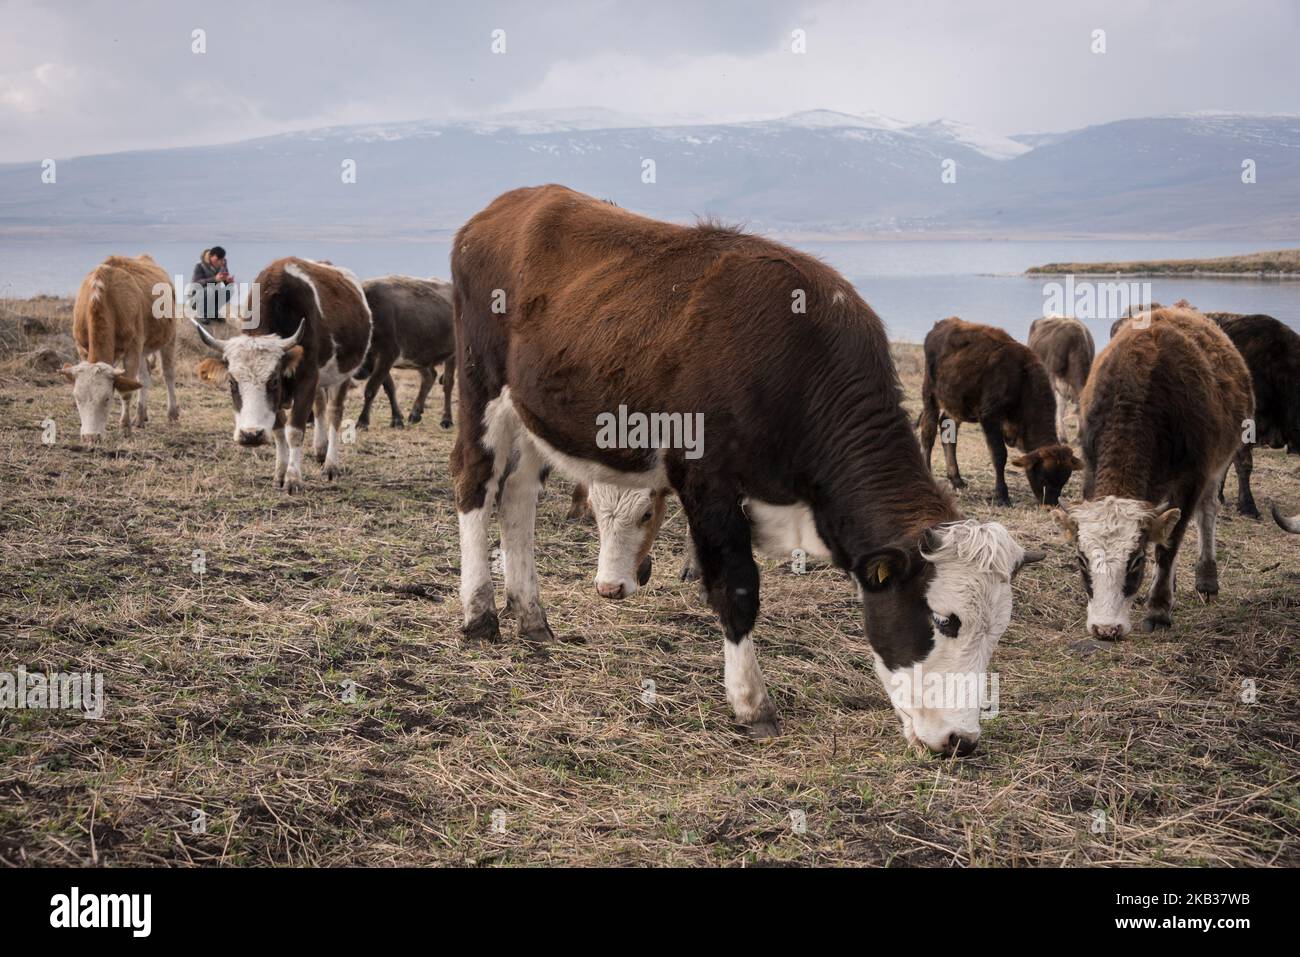 On 12 November 2018, a pastor grazes his cows and cattle on the shores of Lake Cildir, a large freshwater lake in the Ardahan province in the northeastern part of Turkey. (Photo by Diego Cupolo/NurPhoto) Stock Photo